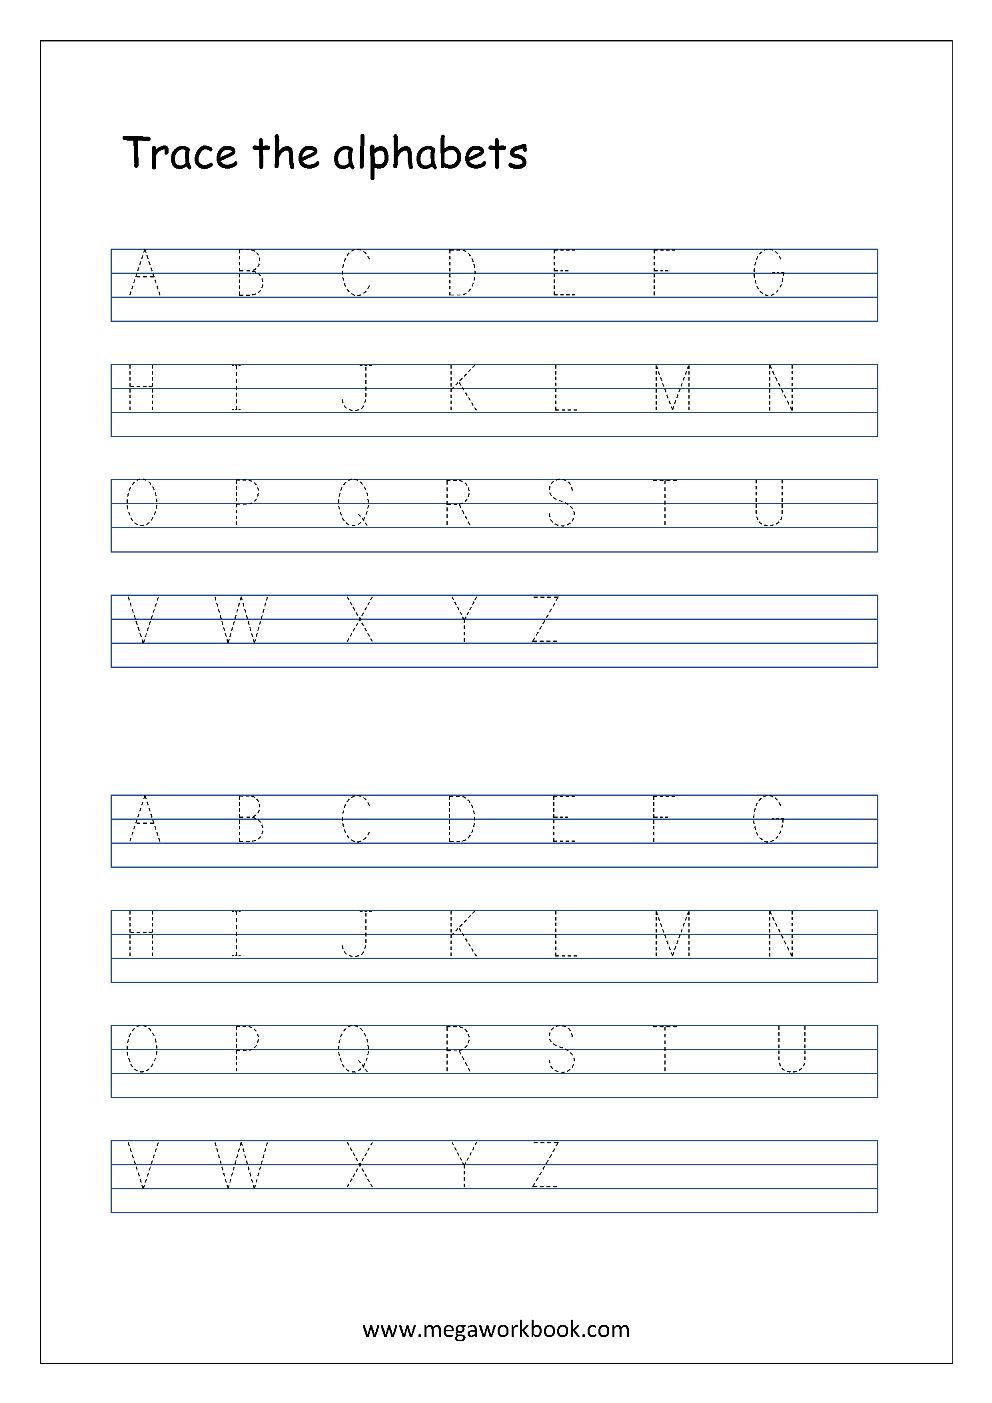 English Worksheet - Alphabet Tracing In 4 Lines - Capital inside Tracing Letters Worksheets A-Z